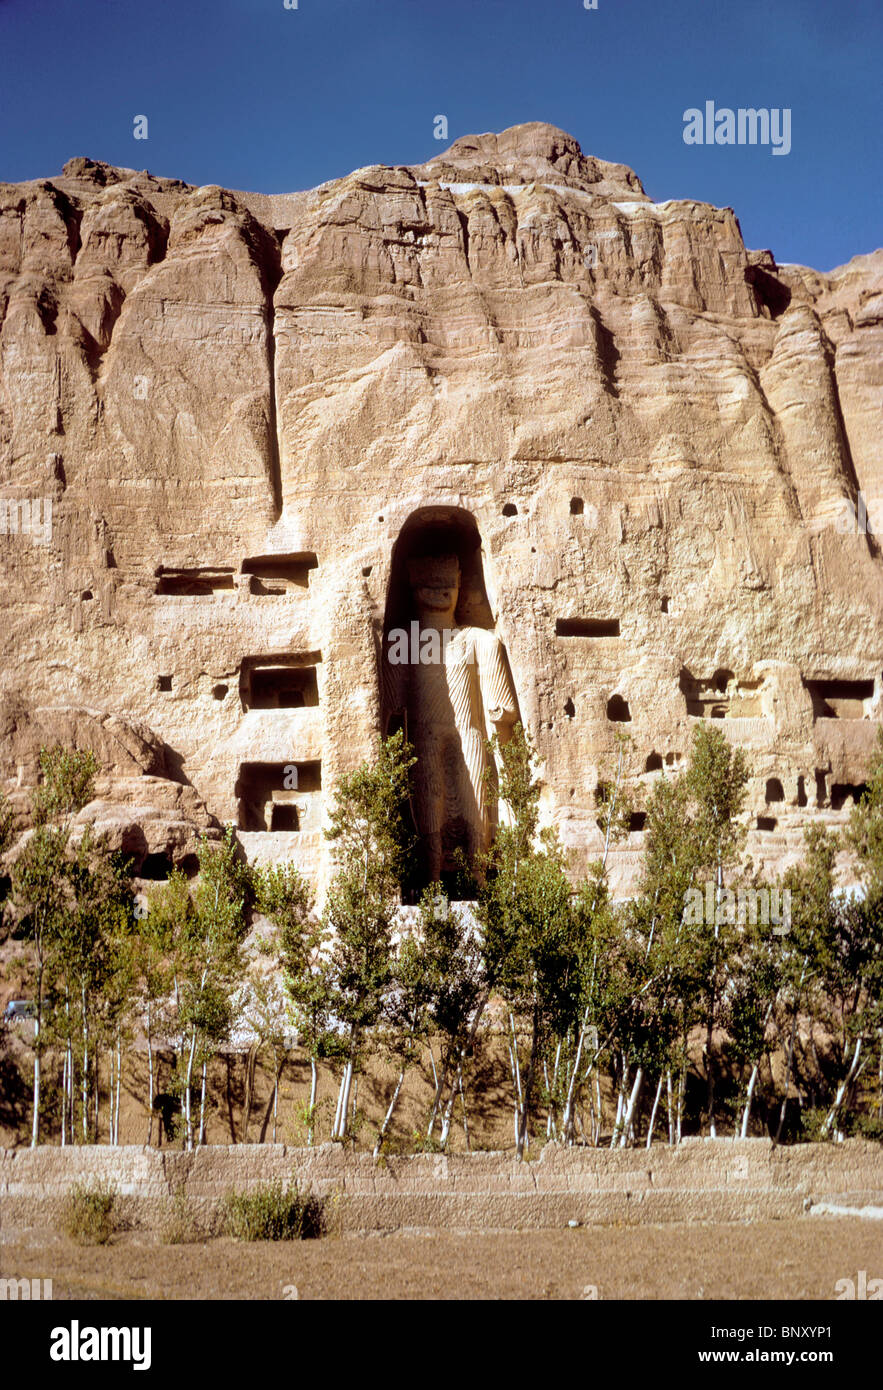 A 1974 image of the ancient standing Buddha now destroyed by the Taliban, Bamiyan, Afghanistan Stock Photo